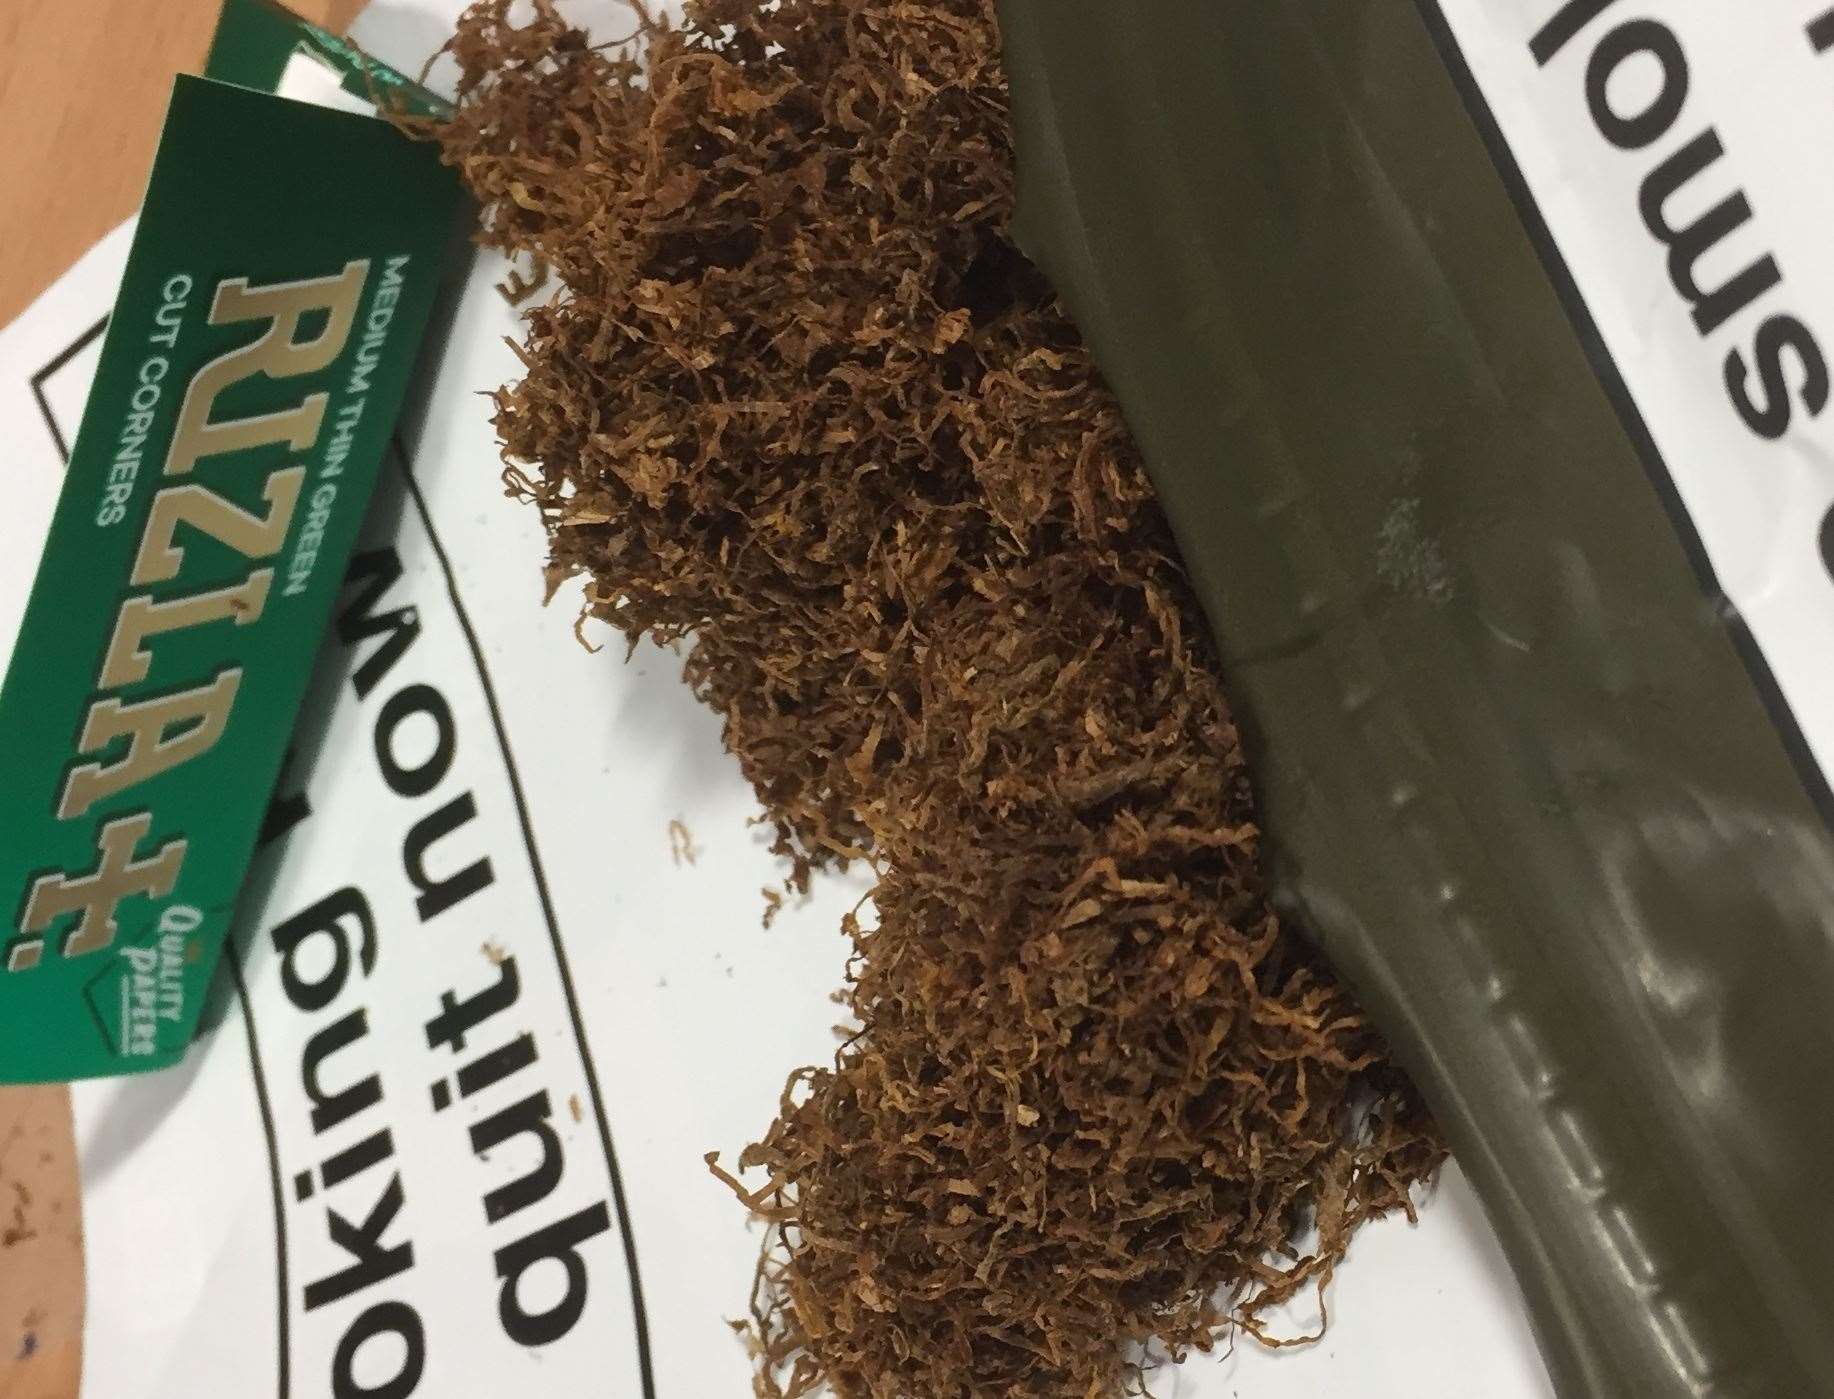 The tobacco was valued at £250,000